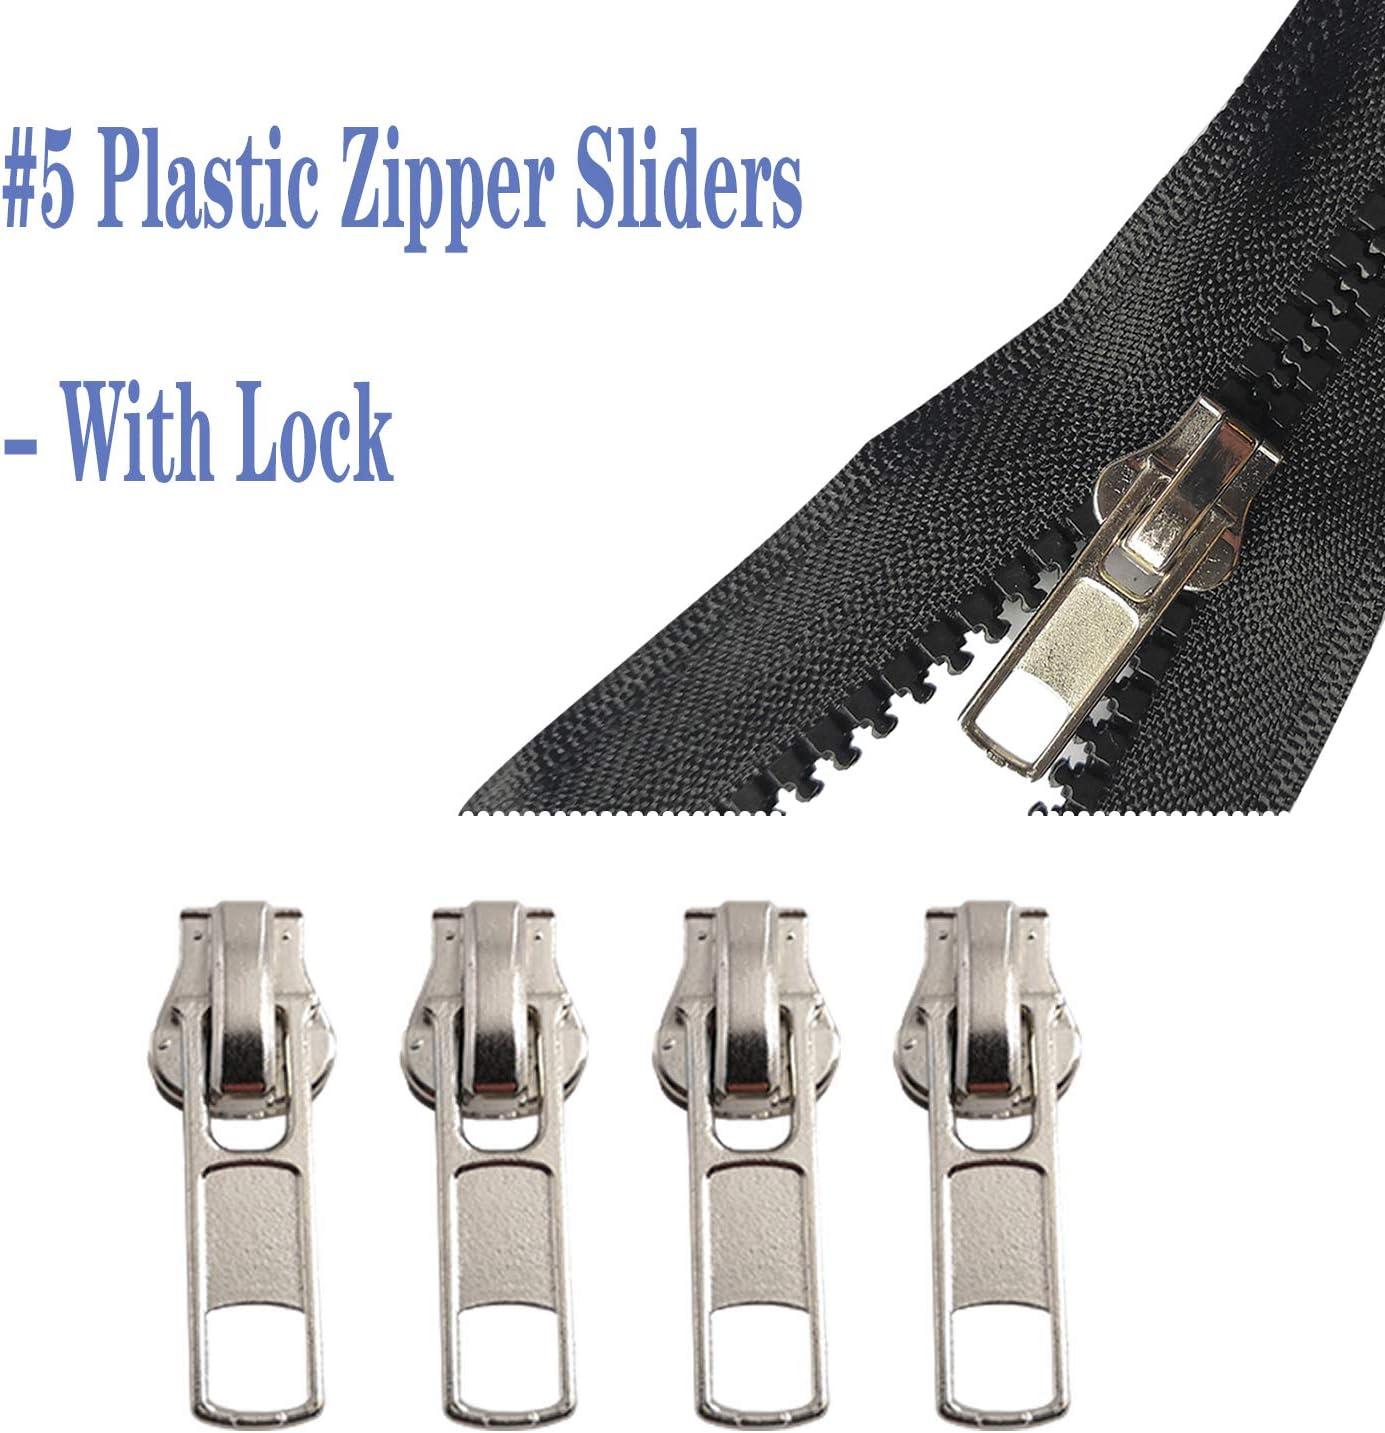  Zipper Fixer Large Black 2 per package : Arts, Crafts & Sewing